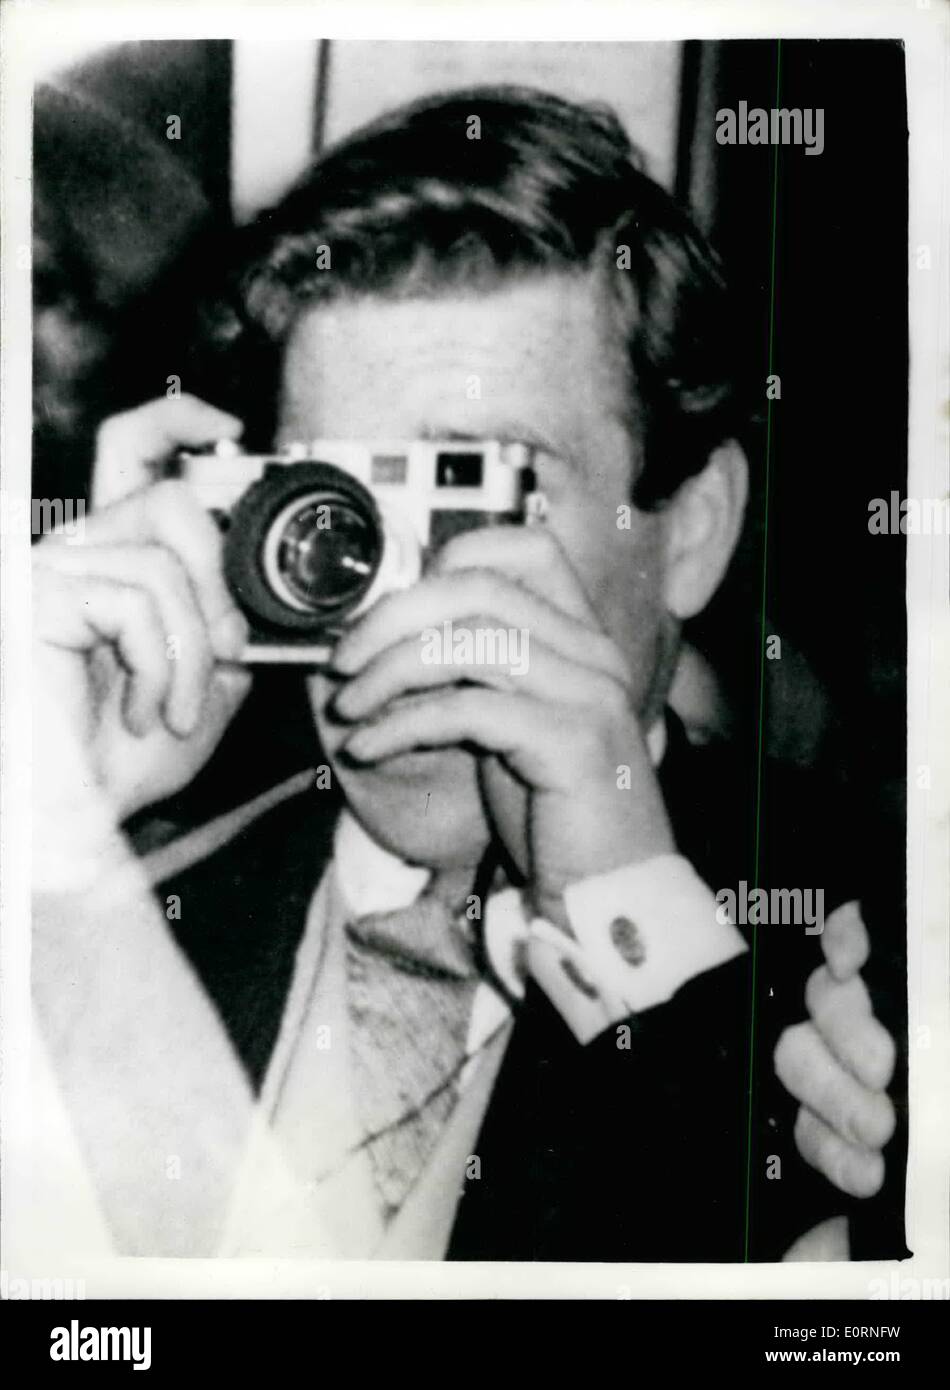 Feb. 02, 1960 - Princess Margaret to Marry Photographer, he photographs a wedding; The engagement was announced last night between H.R.H. Princess Margaret and photographer Tony Armstrong Jones who made a name for himself as a society photographer with his portraits of members of the Royal family. Photo Shows Tony Armstrong Jones in action with his camera. Picture taken when he photographed the wedding of actress Anna Massey to actor Jeremy Brett at Highgate Village in May 1958. Stock Photo